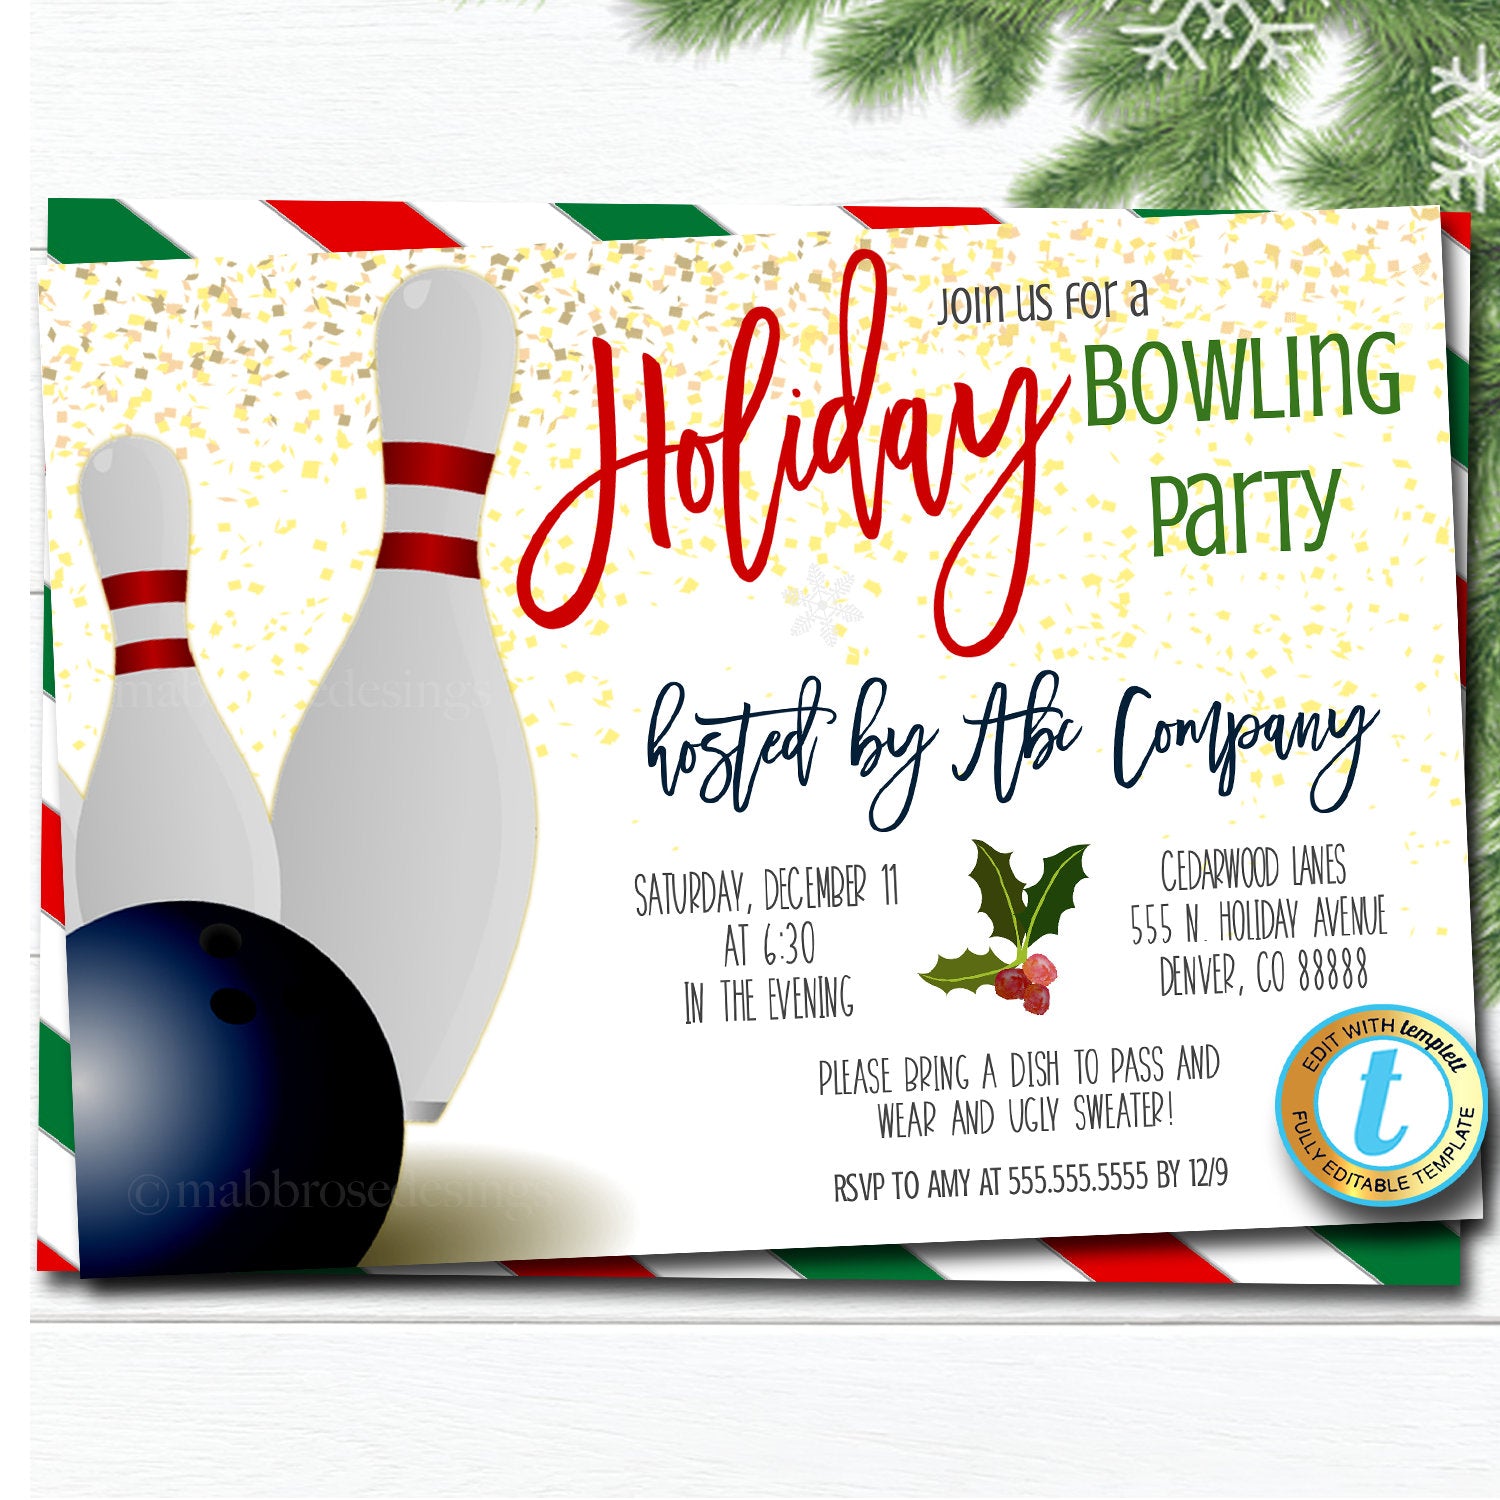 Christmas Bowling Party Invite TidyLady Printables